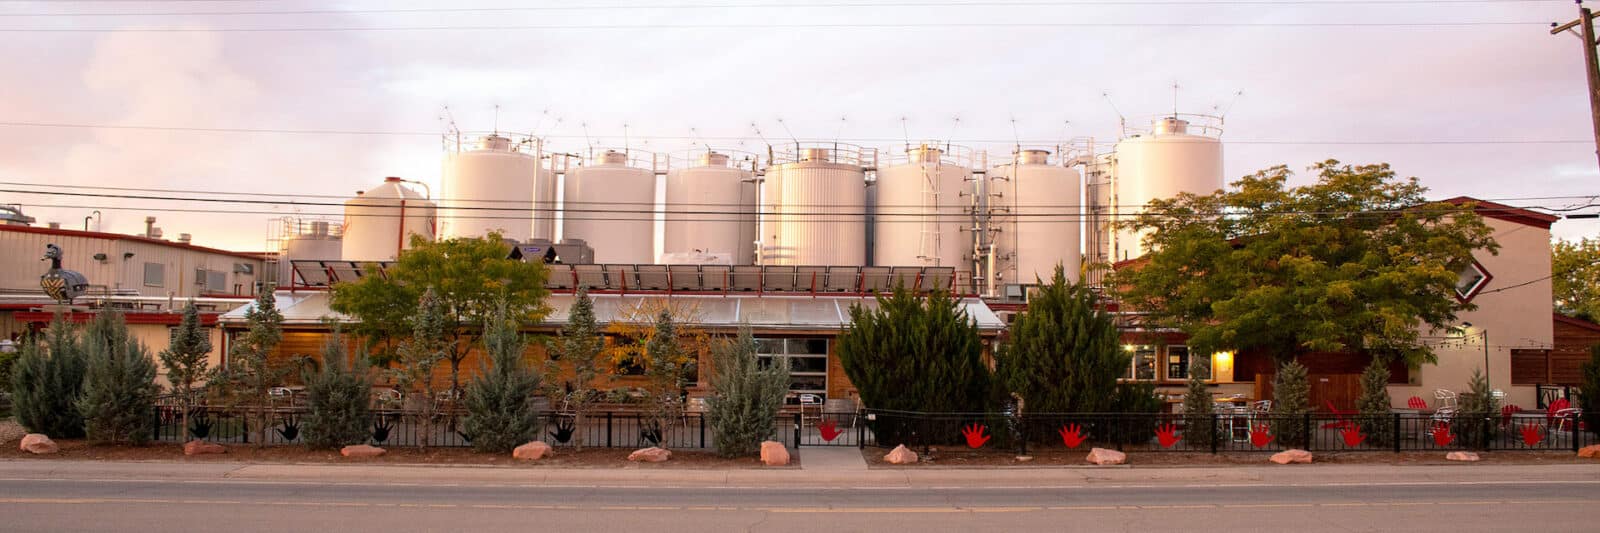 Panoramic view of Left Hand Brewery taphouse